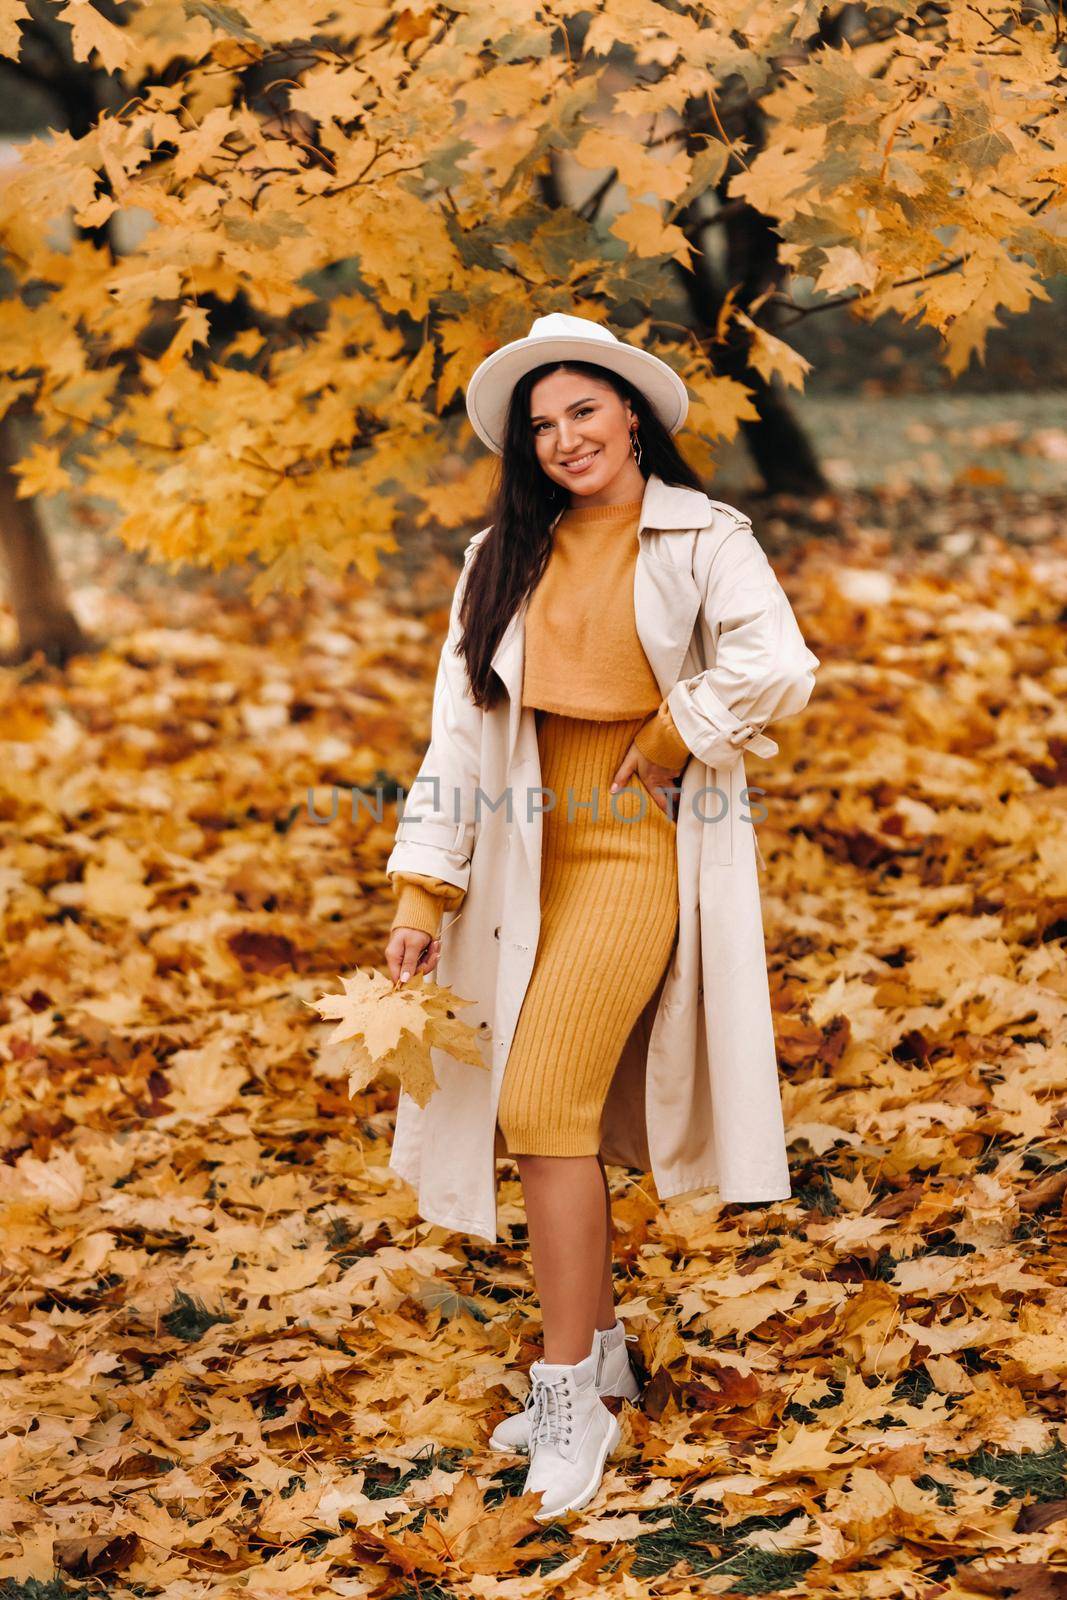 a girl in a white coat and hat smiles in an autumn Park.Portrait of a woman in Golden autumn